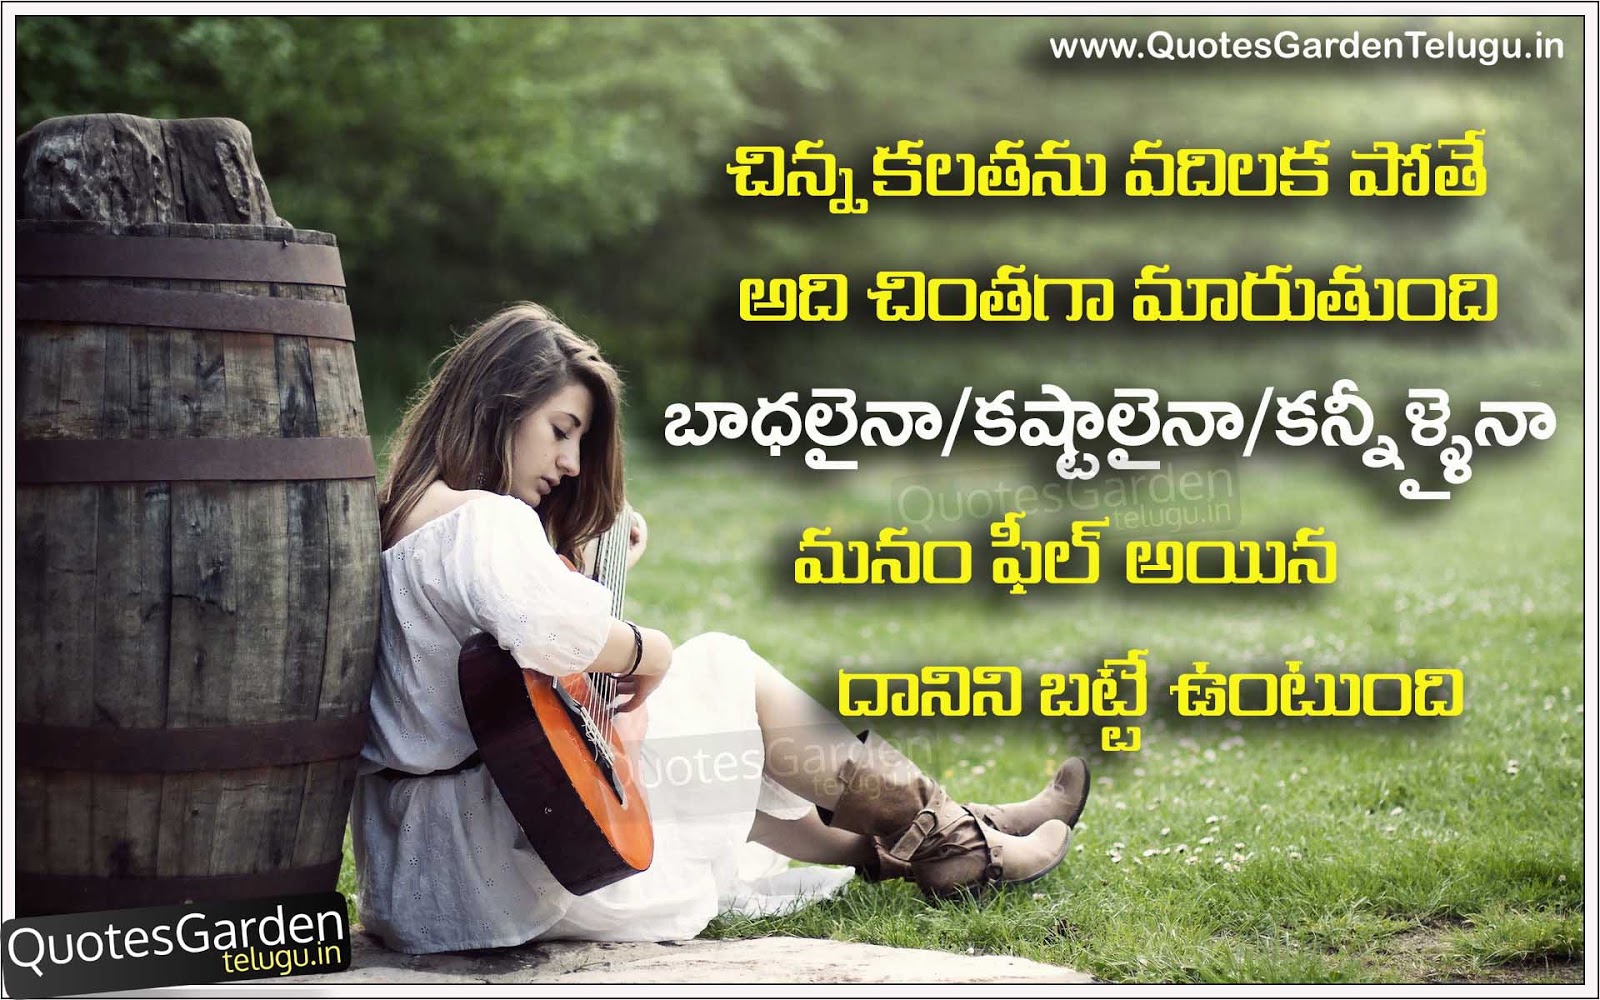 Best Inspirational  Telugu  Life stories quotes  for students  